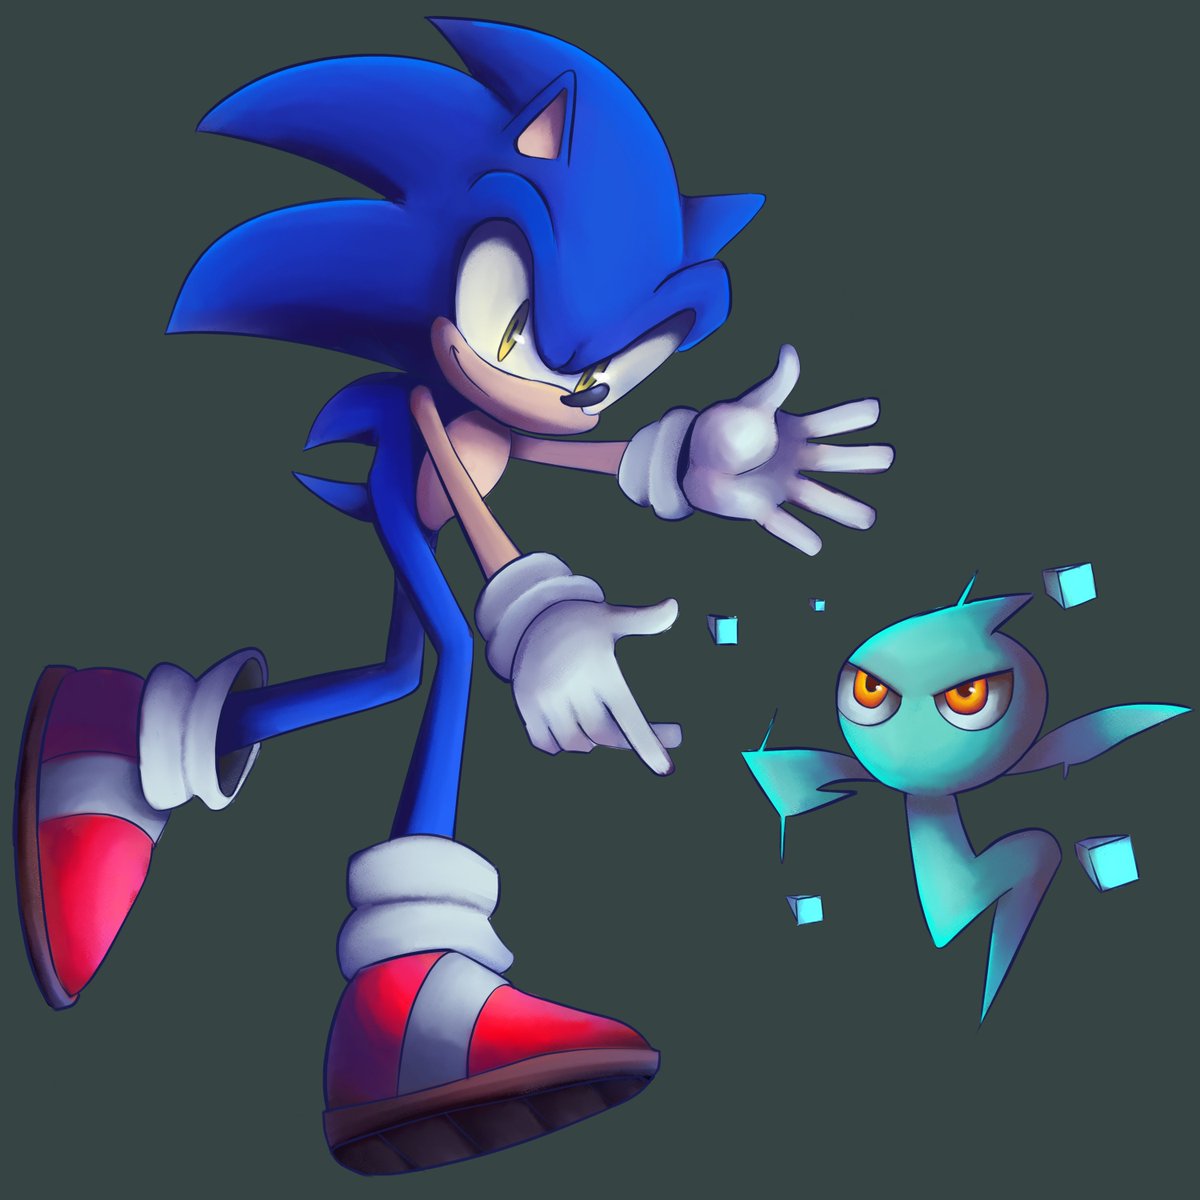 Sonic and Cyan Wisp 35 
#sonicfanart #SonicTheHedgehog #sonicColors #SonicColorsUltimate #sonicartist #소닉파란 #ソニック